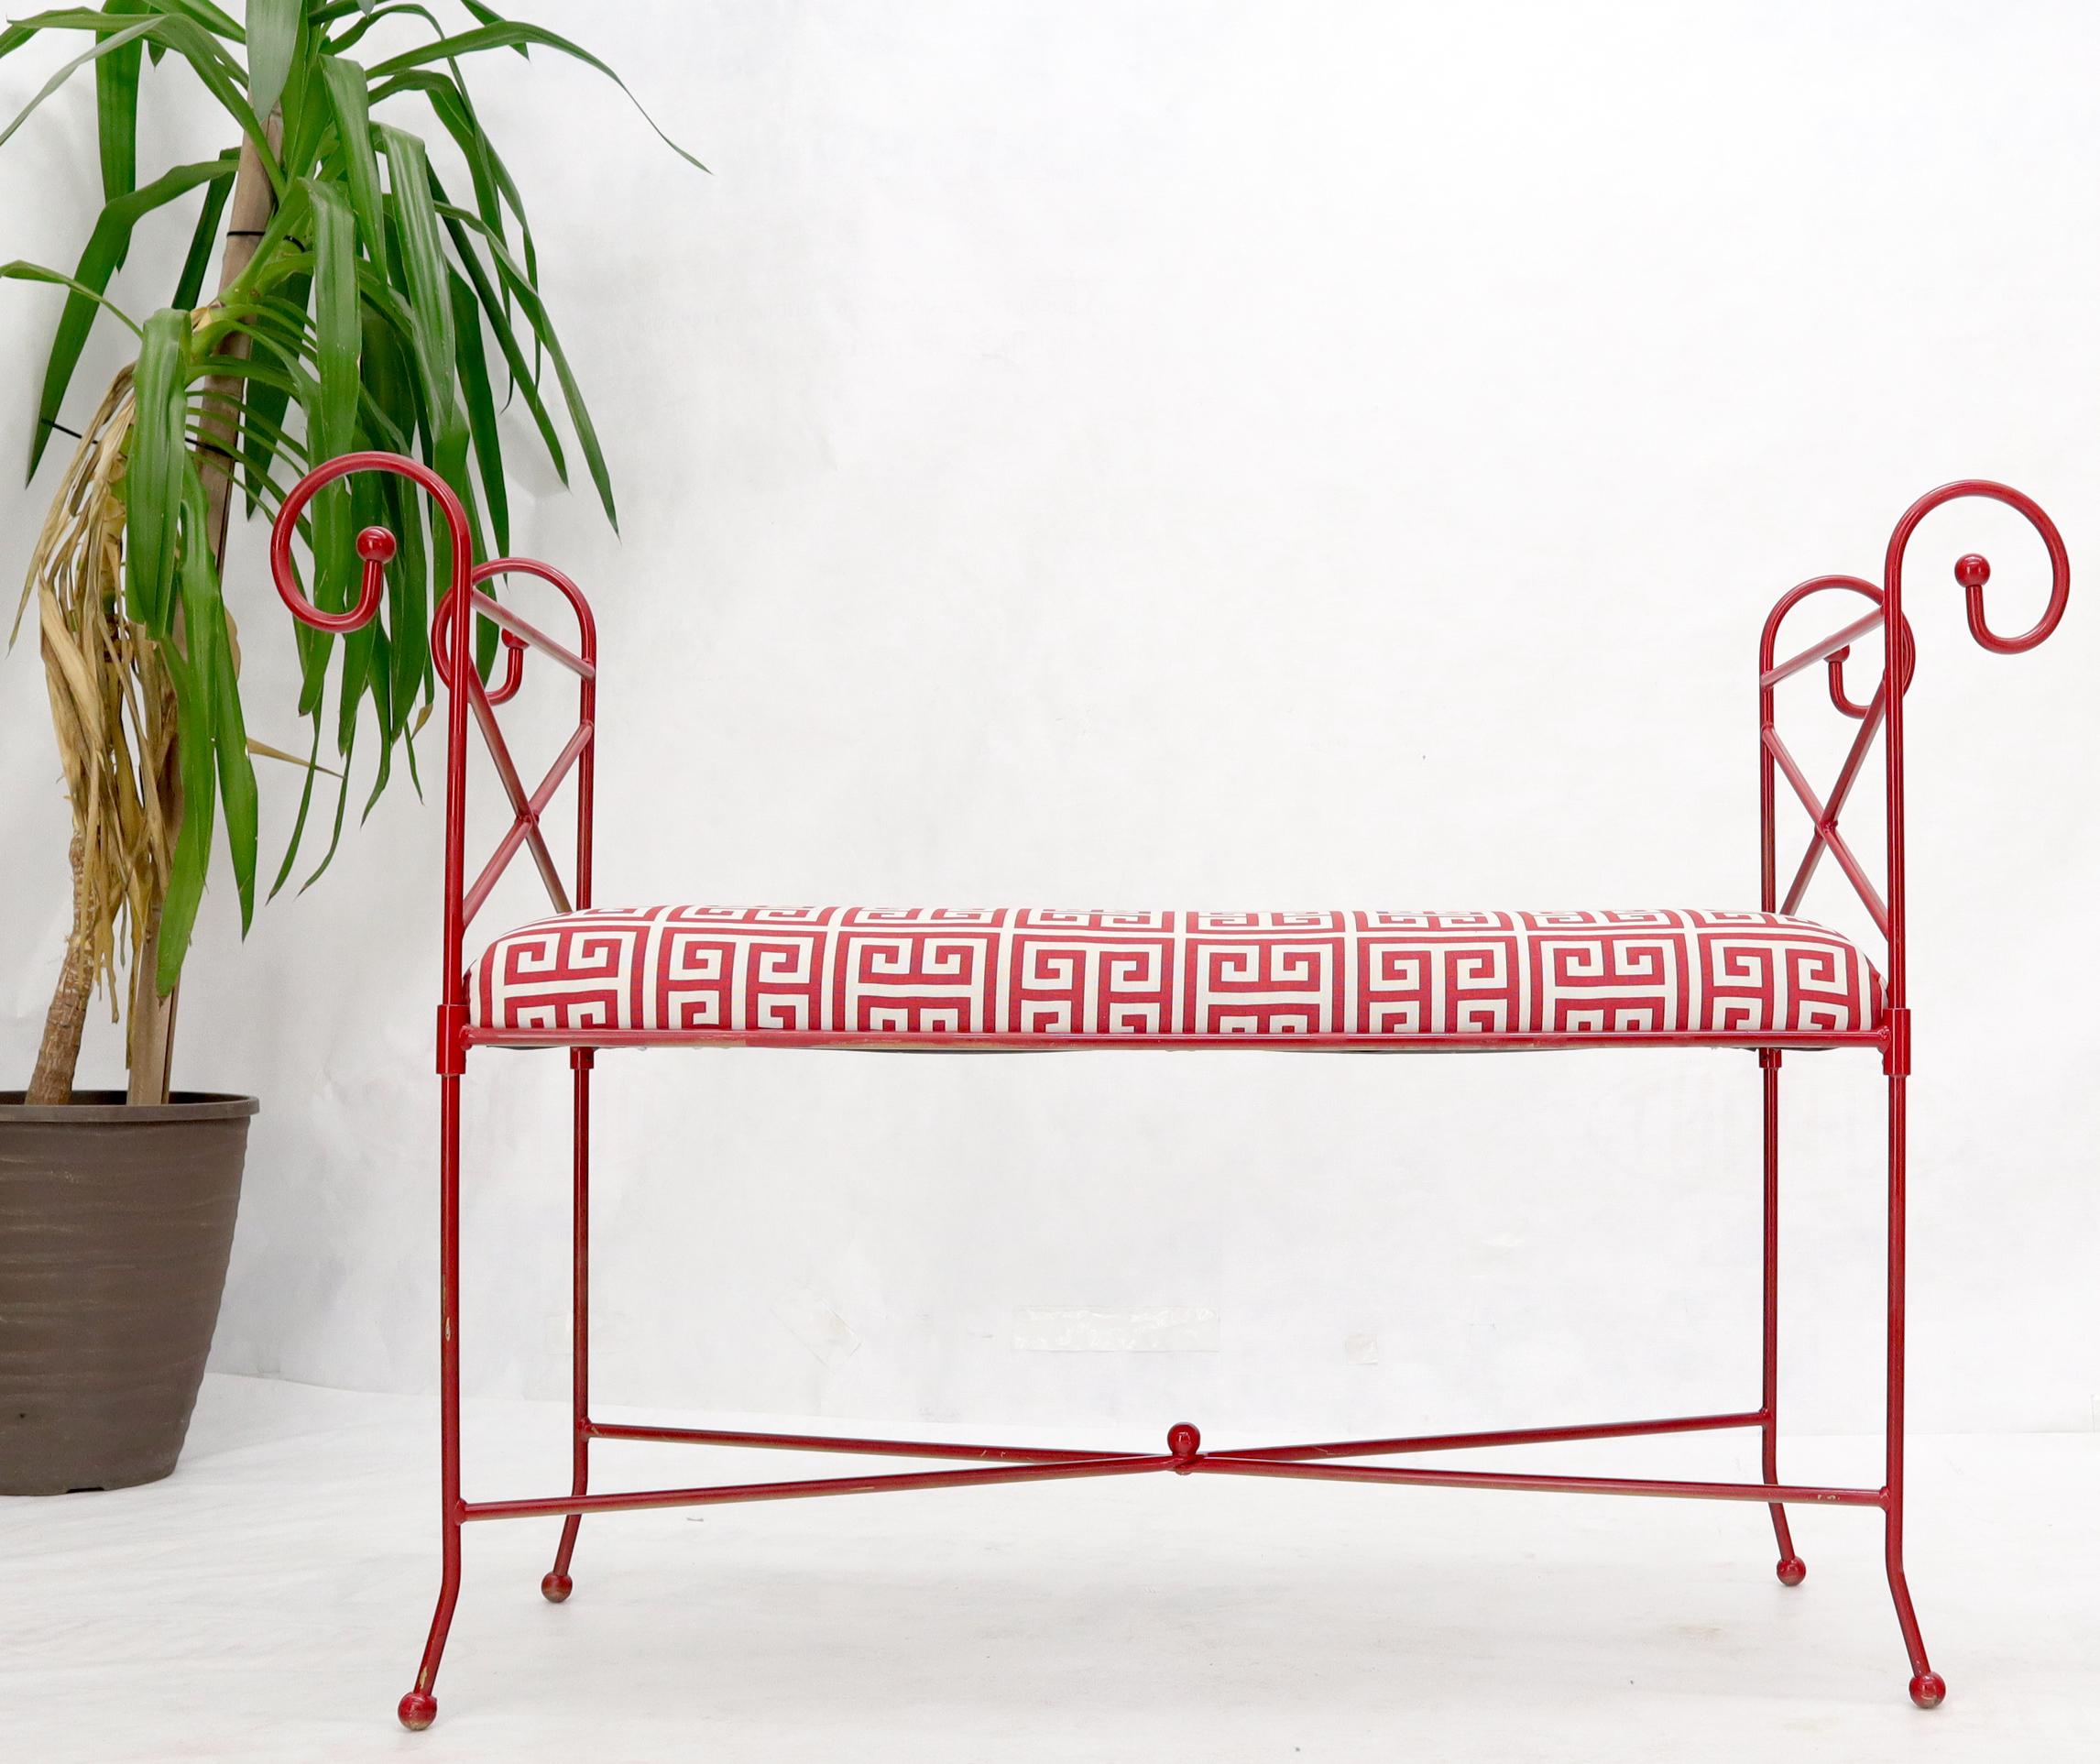 Circa 1960s Wrought Iron Window Bench Fully Restored New Red Lacquer Upholstery For Sale 2